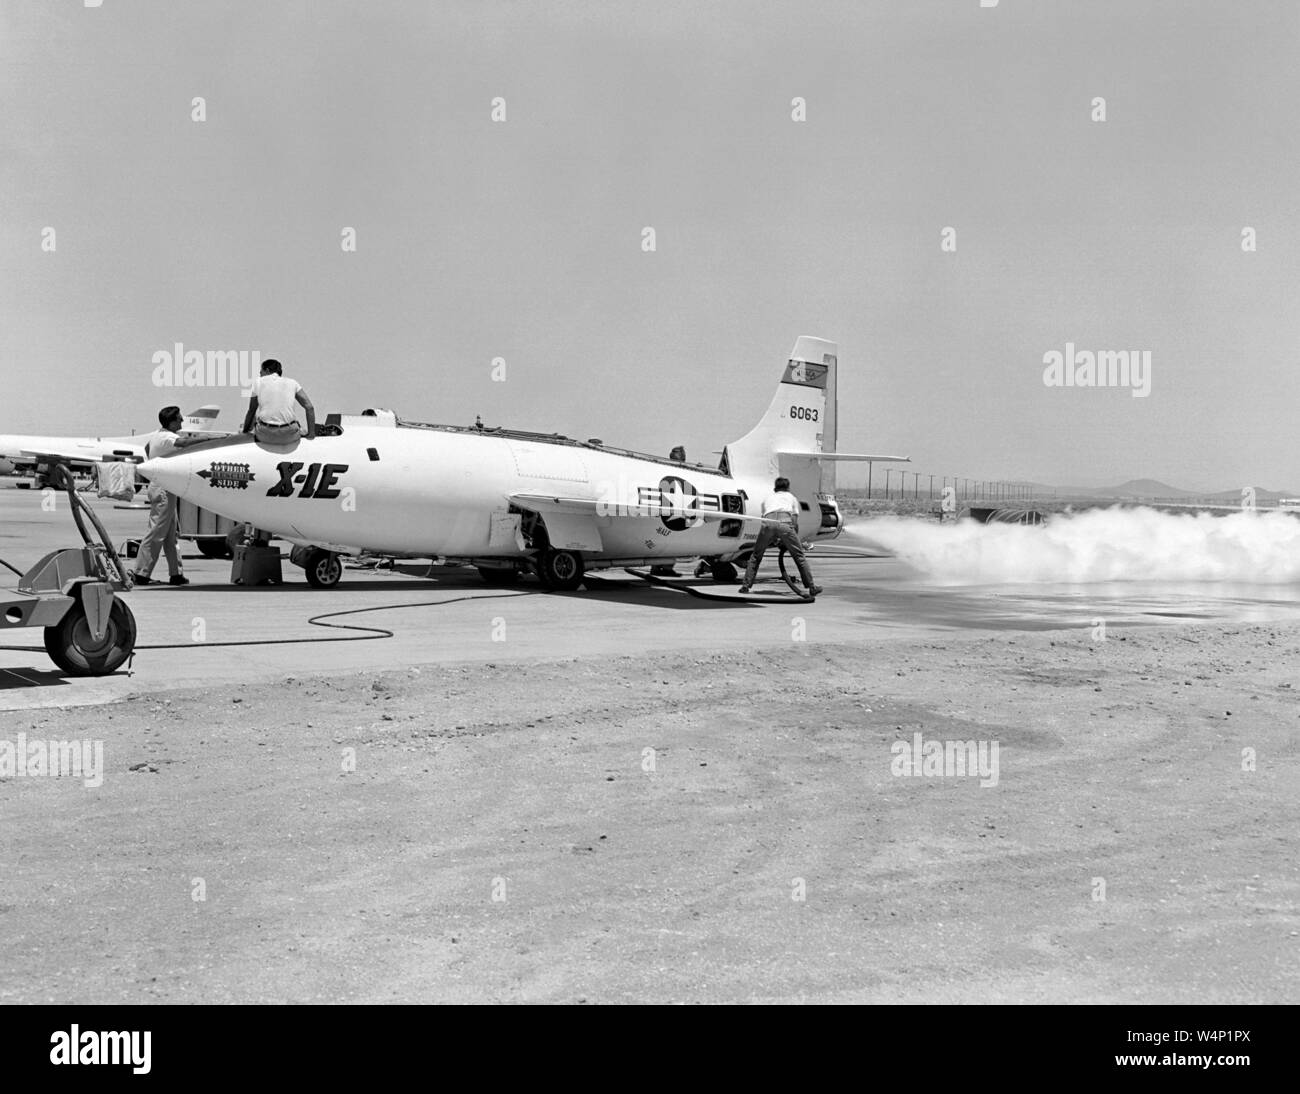 Bell Aircraft Corporation X-1E during a ground engine test run on the NACA High-Speed Flight Station ramp near the Rogers Dry Lake, NASA Flight Research Center, Edwards, California, February 6, 1956. Image courtesy National Aeronautics and Space Administration (NASA). () Stock Photo